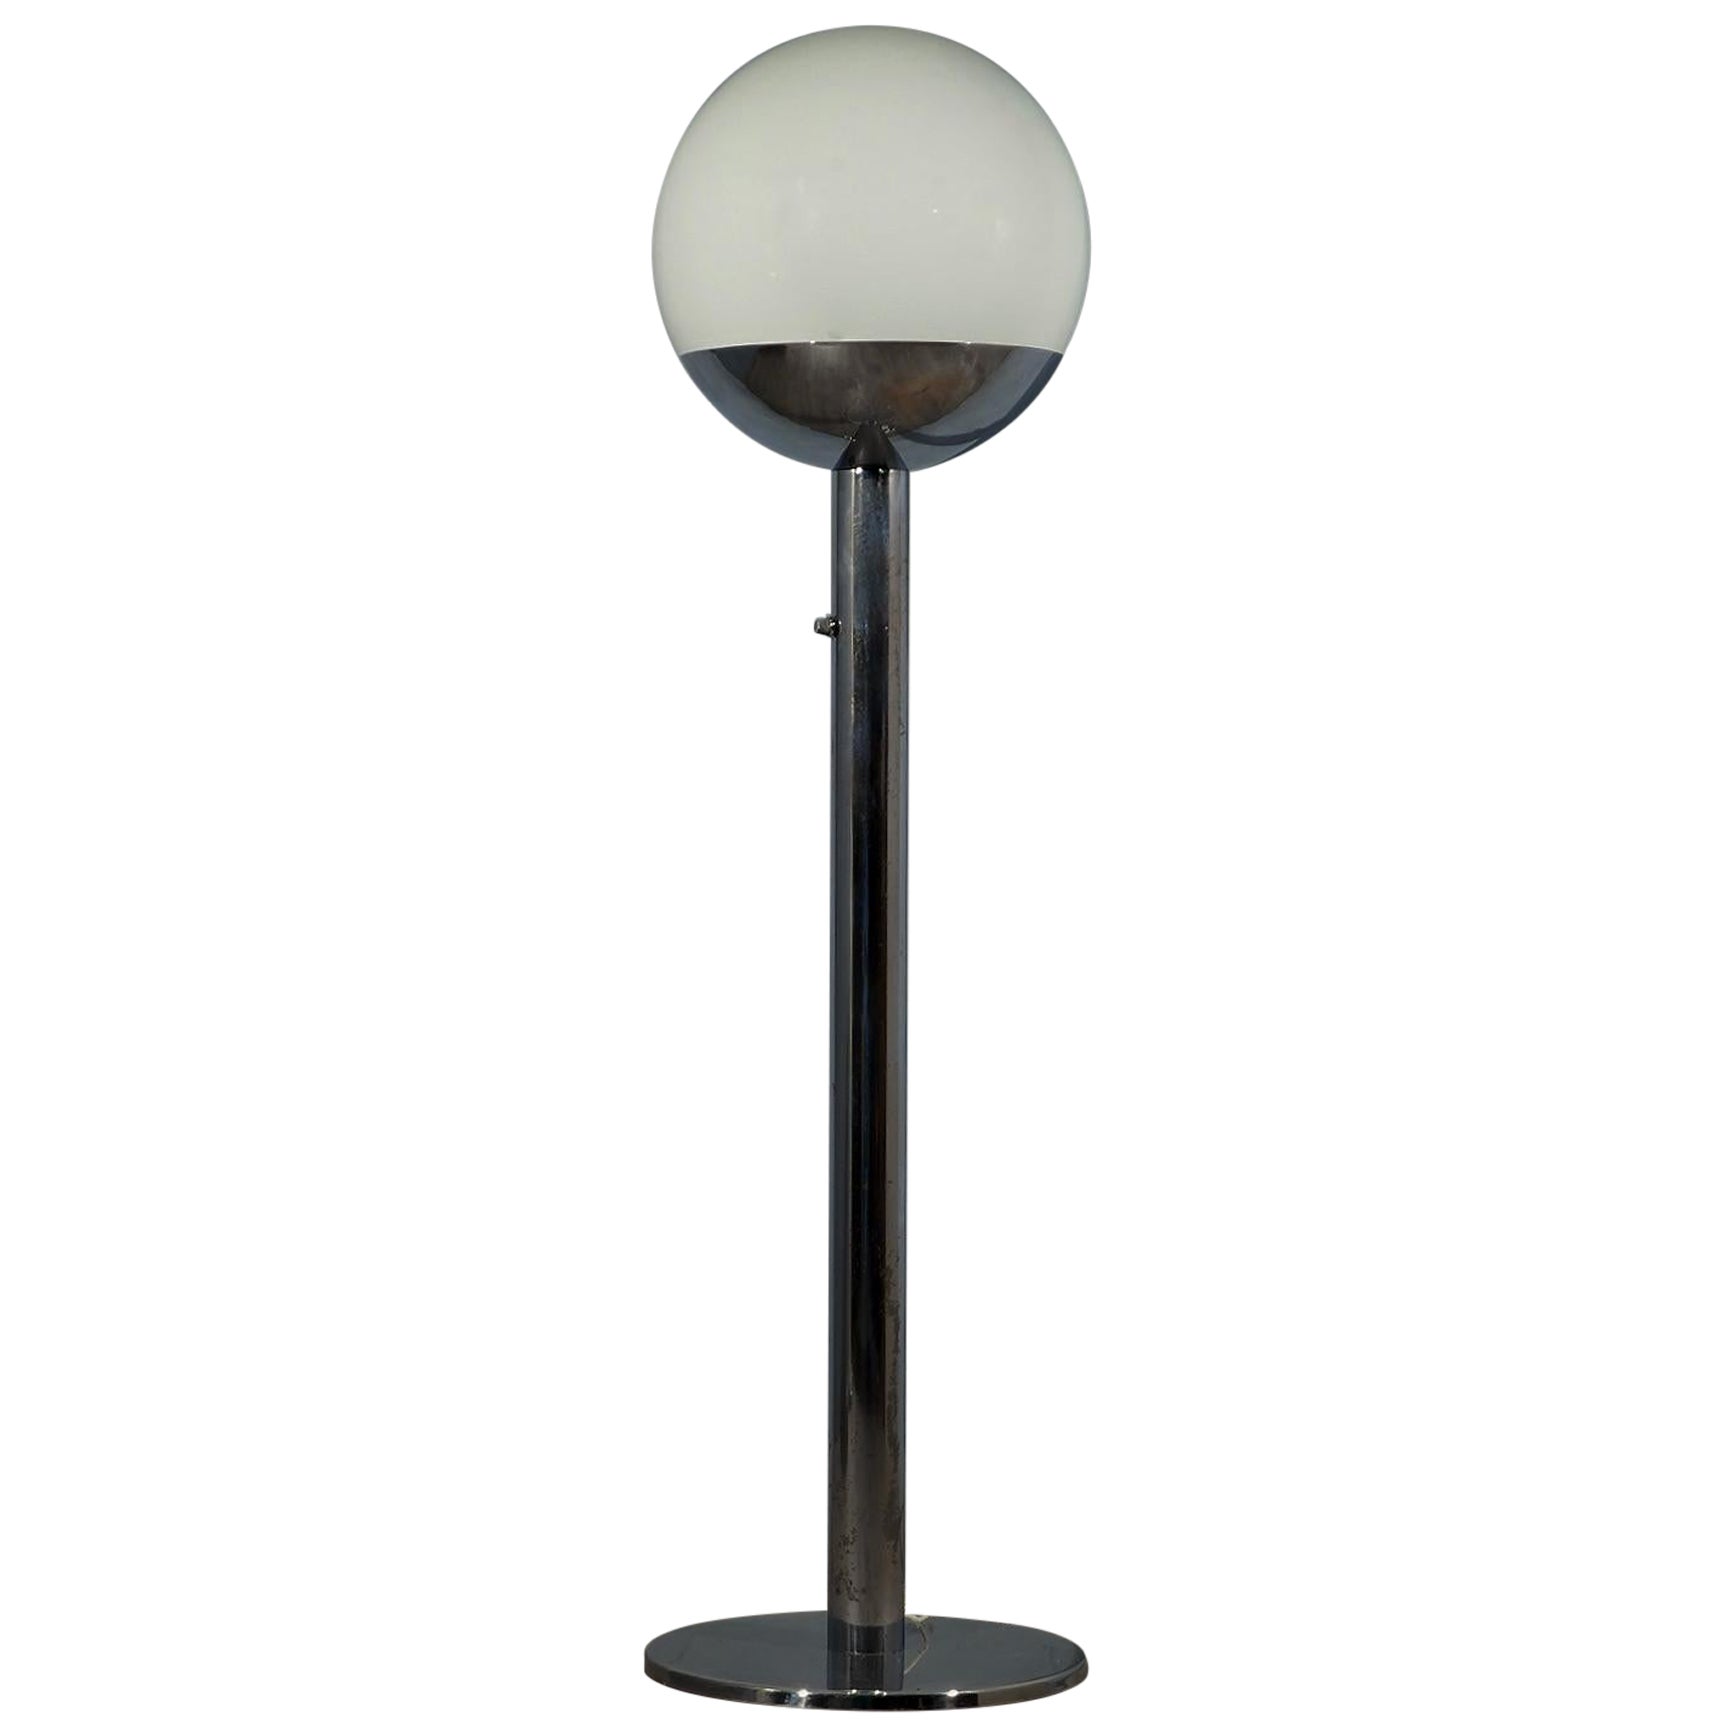 Pia Guidetti Crippa for Luci Glass and Chrome Italian Floor Lamp, 1970 For Sale